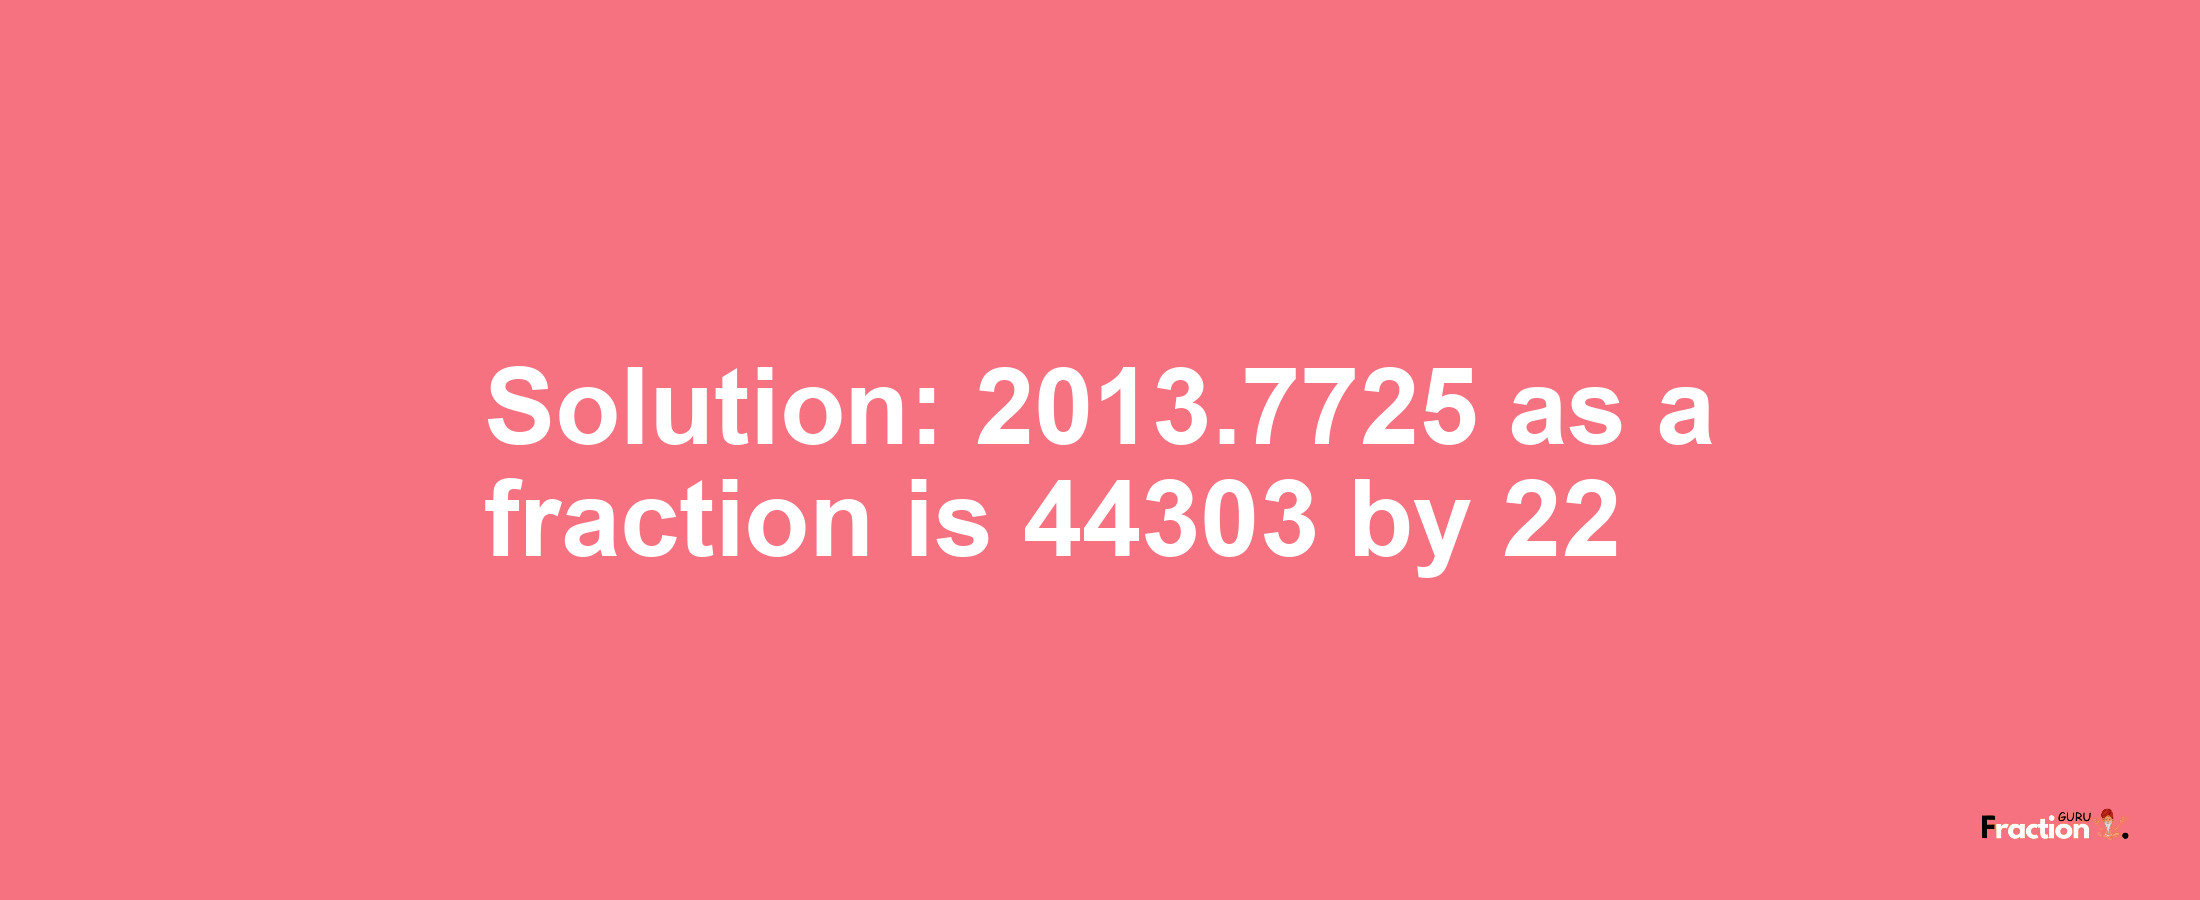 Solution:2013.7725 as a fraction is 44303/22